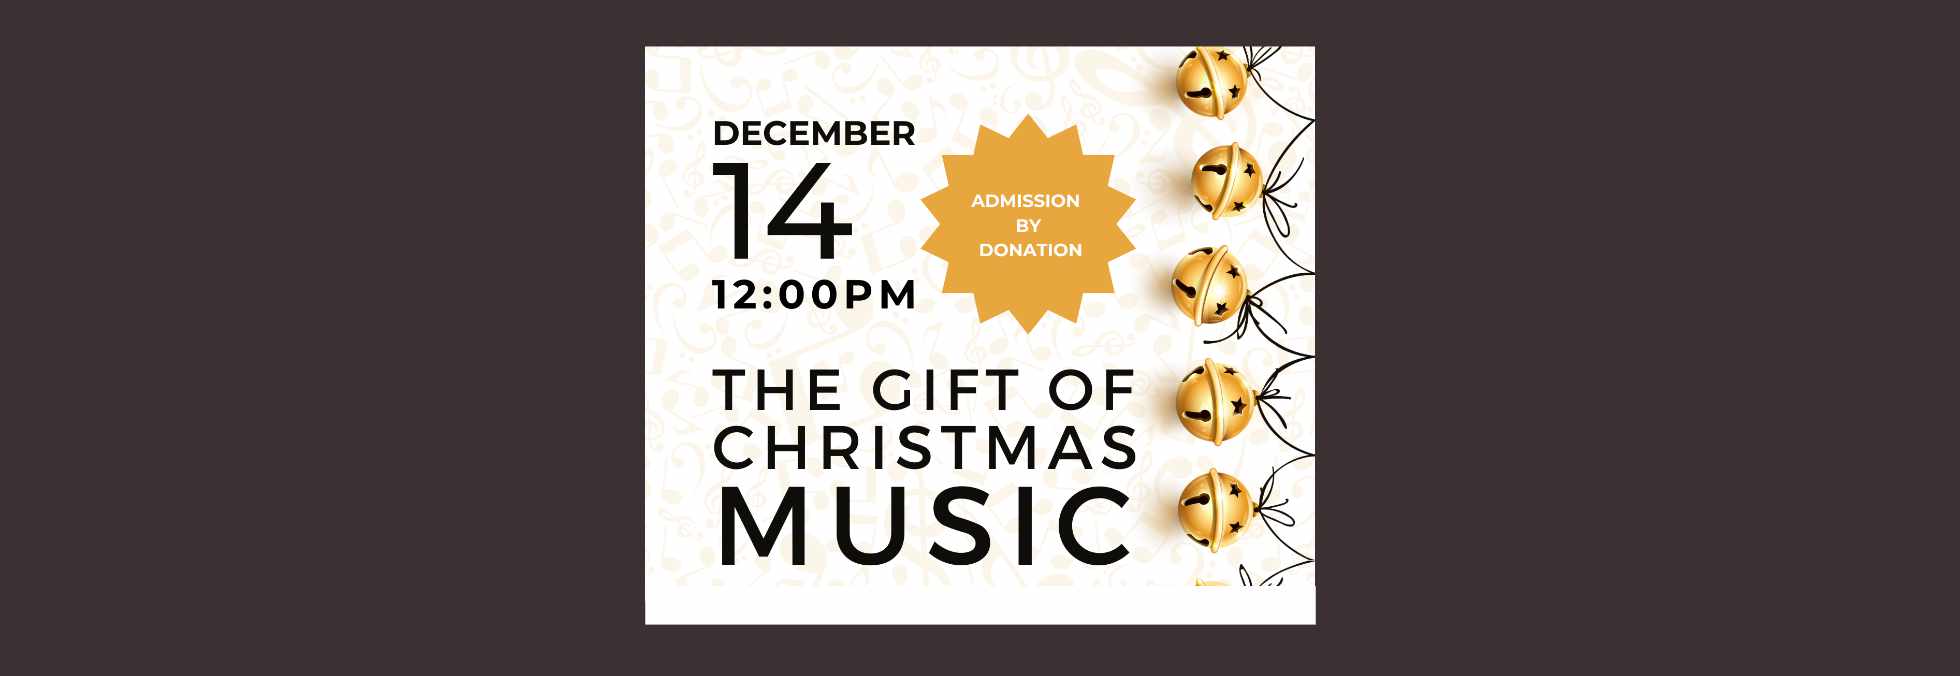 The Gift of Christmas Music at St. Andrew's on Dec 14